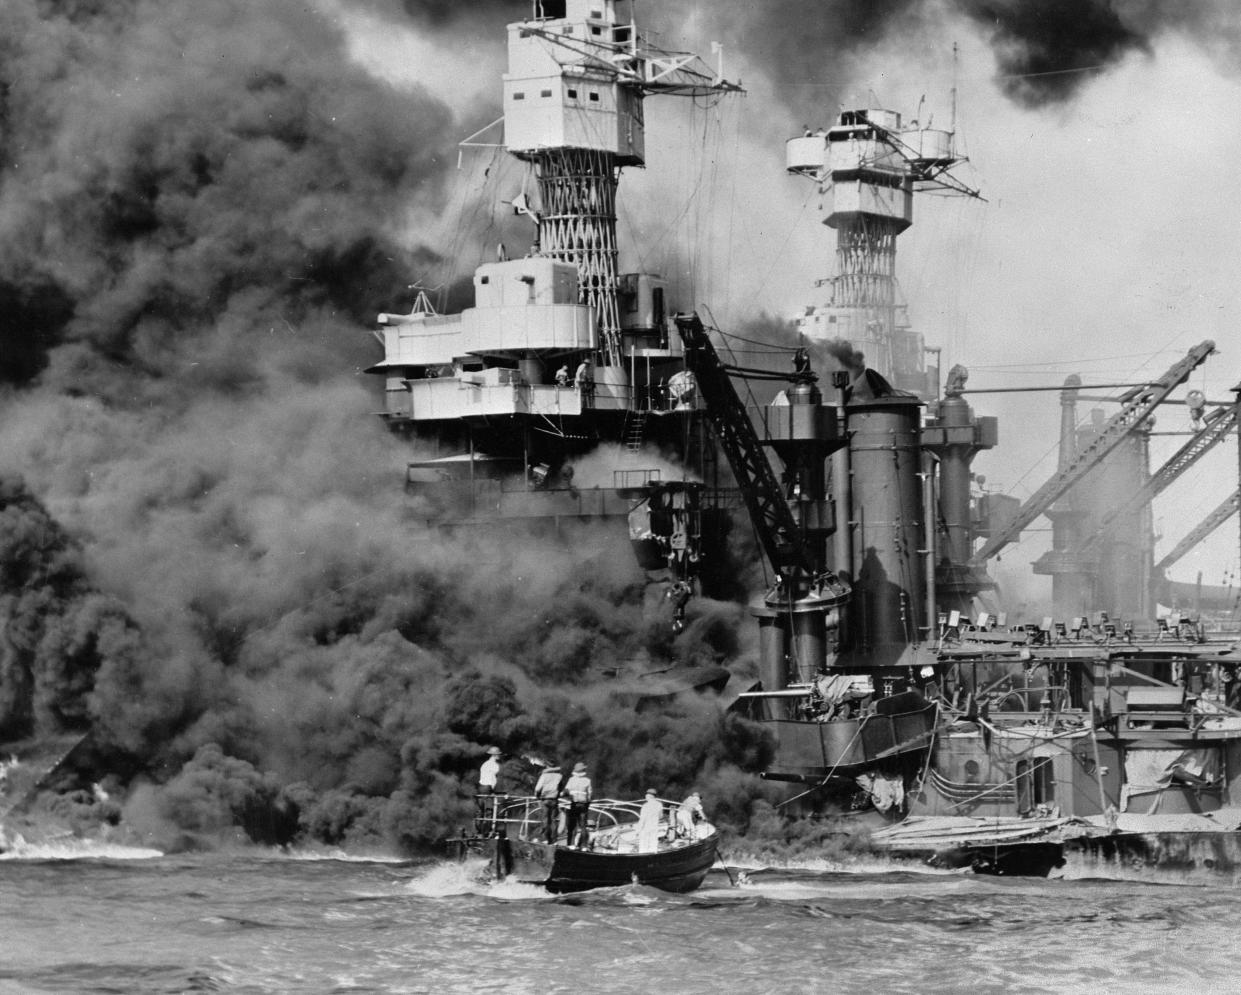 In this Dec. 7, 1941, photo made available by the U.S. Navy, a small boat rescues a seaman from the USS West Virginia burning in the foreground in Pearl Harbor, Hawaii, after Japanese aircraft attacked the military installation.